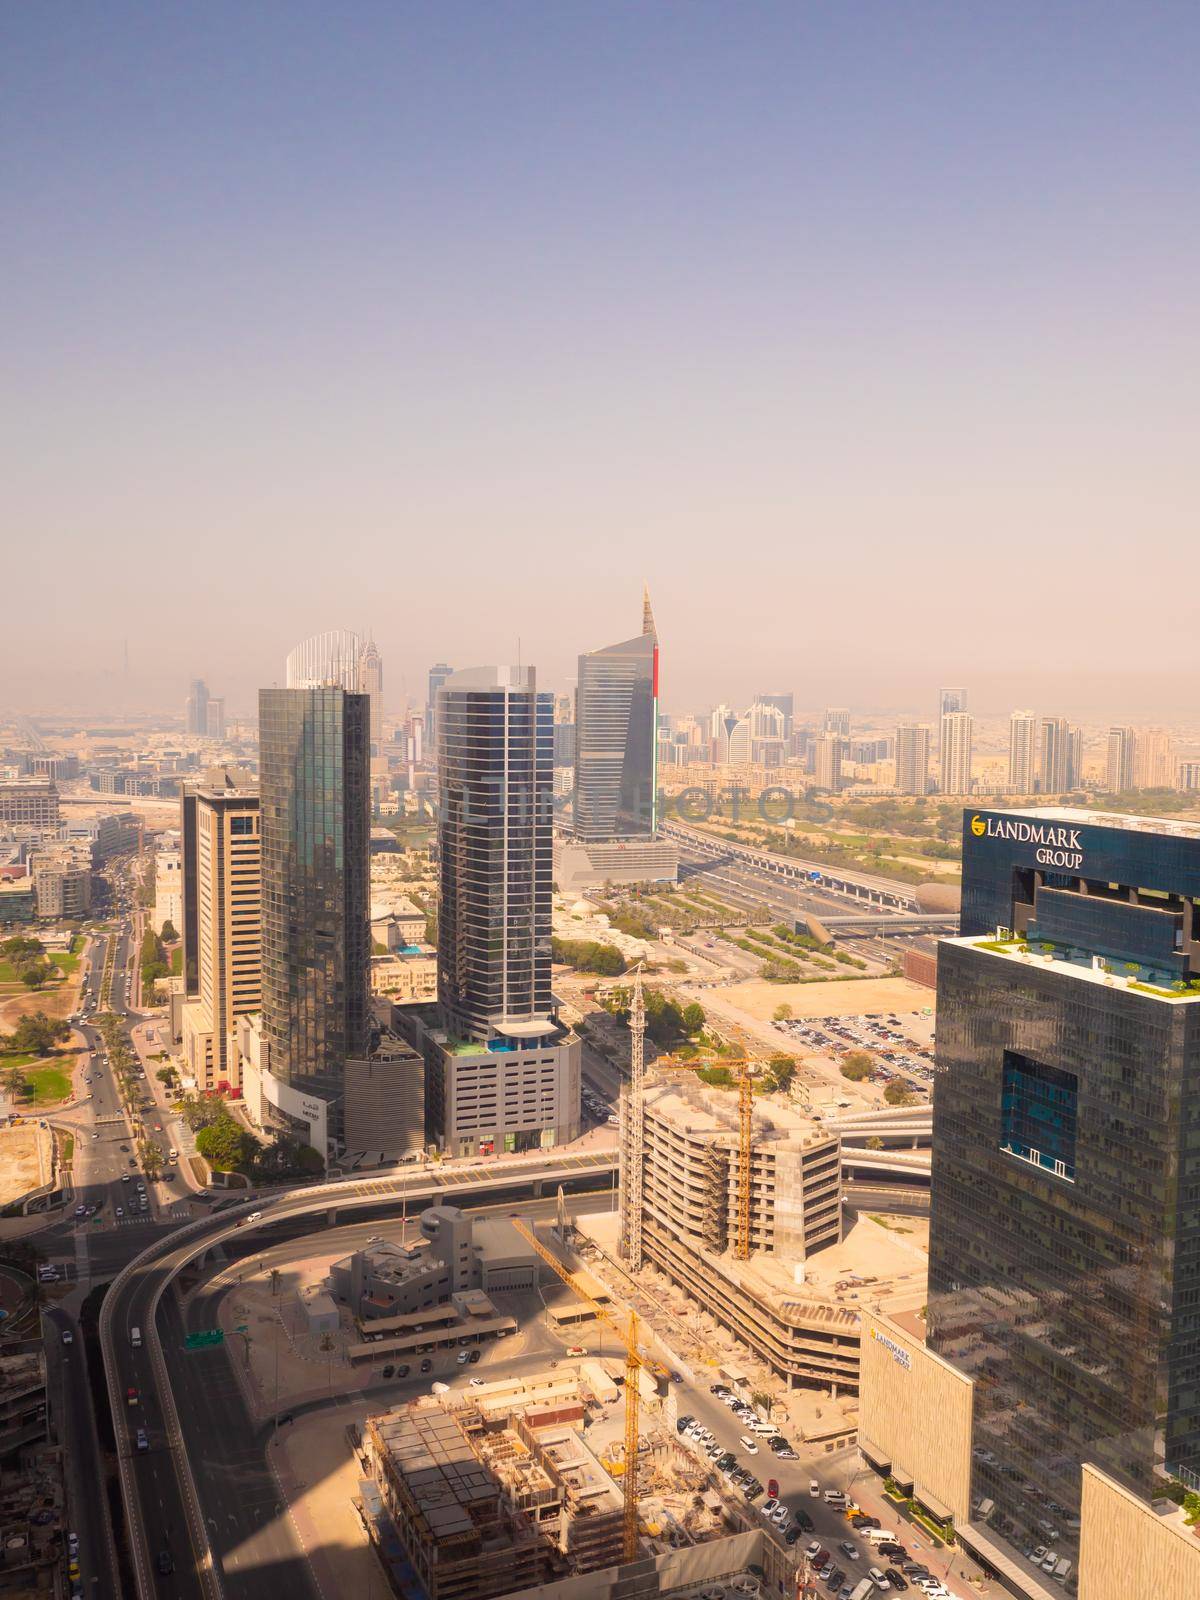 Panorama of the area with skyscrapers in Dubai